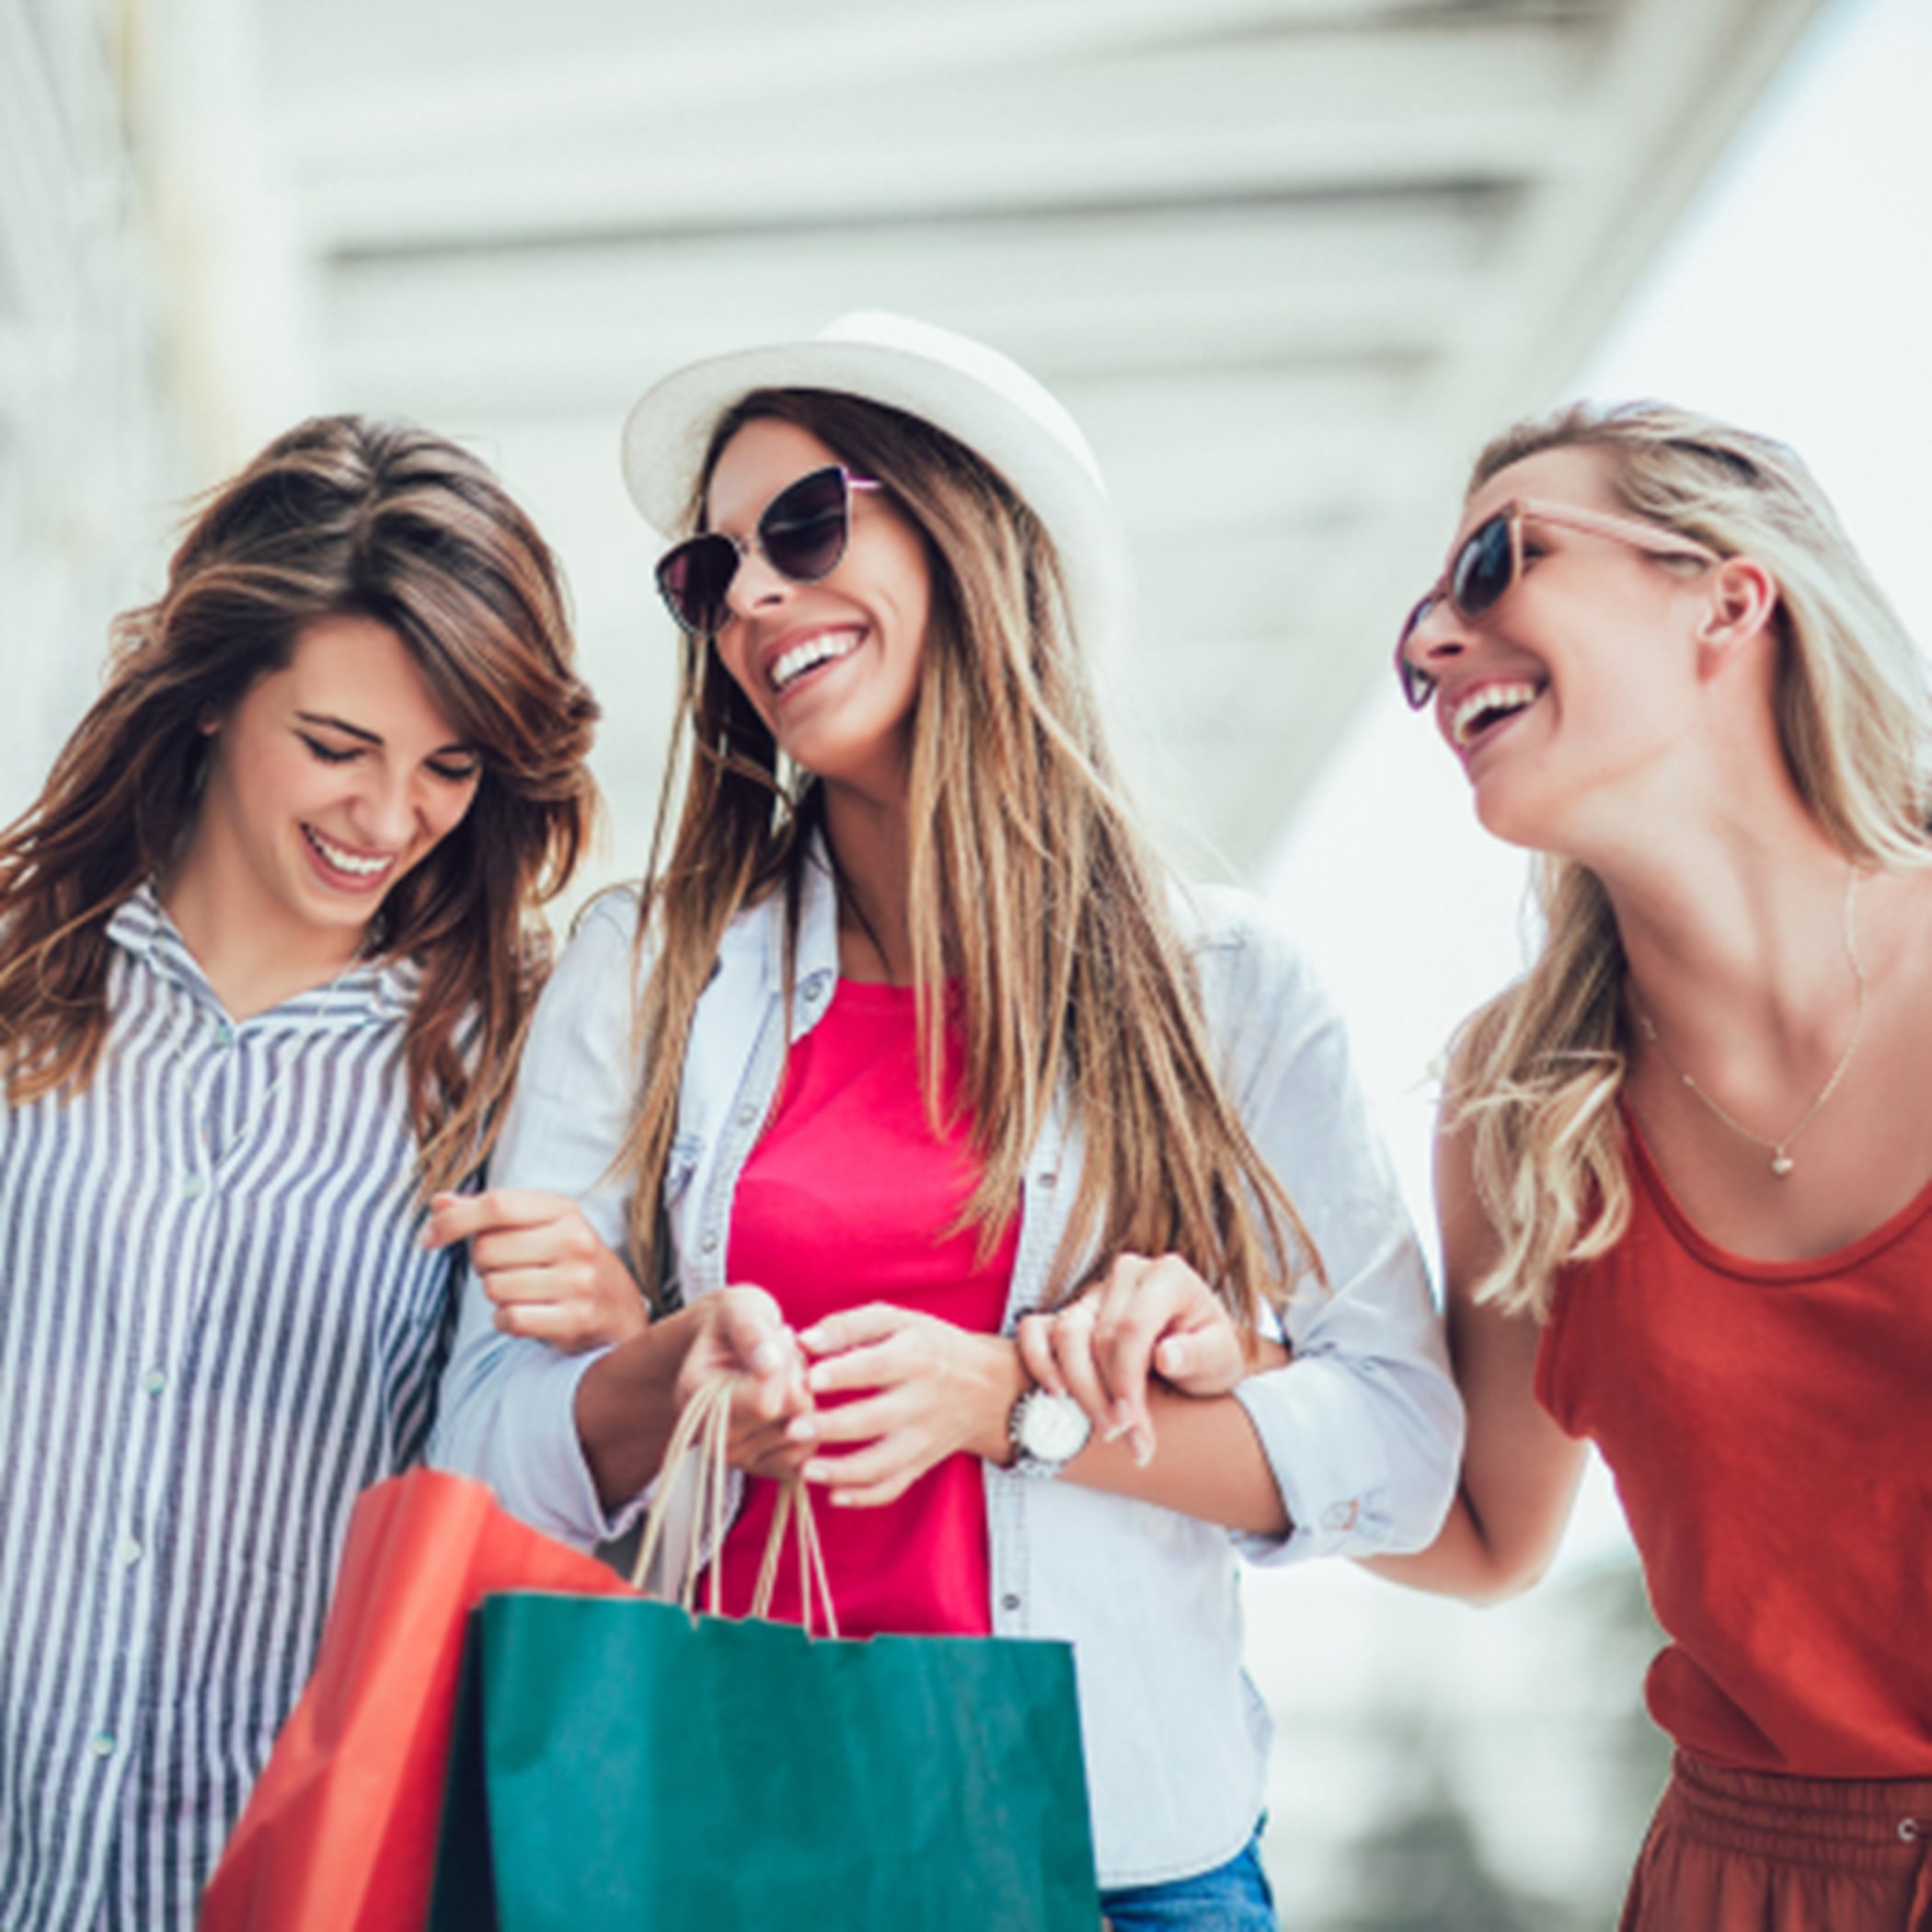 Women smiling and shopping